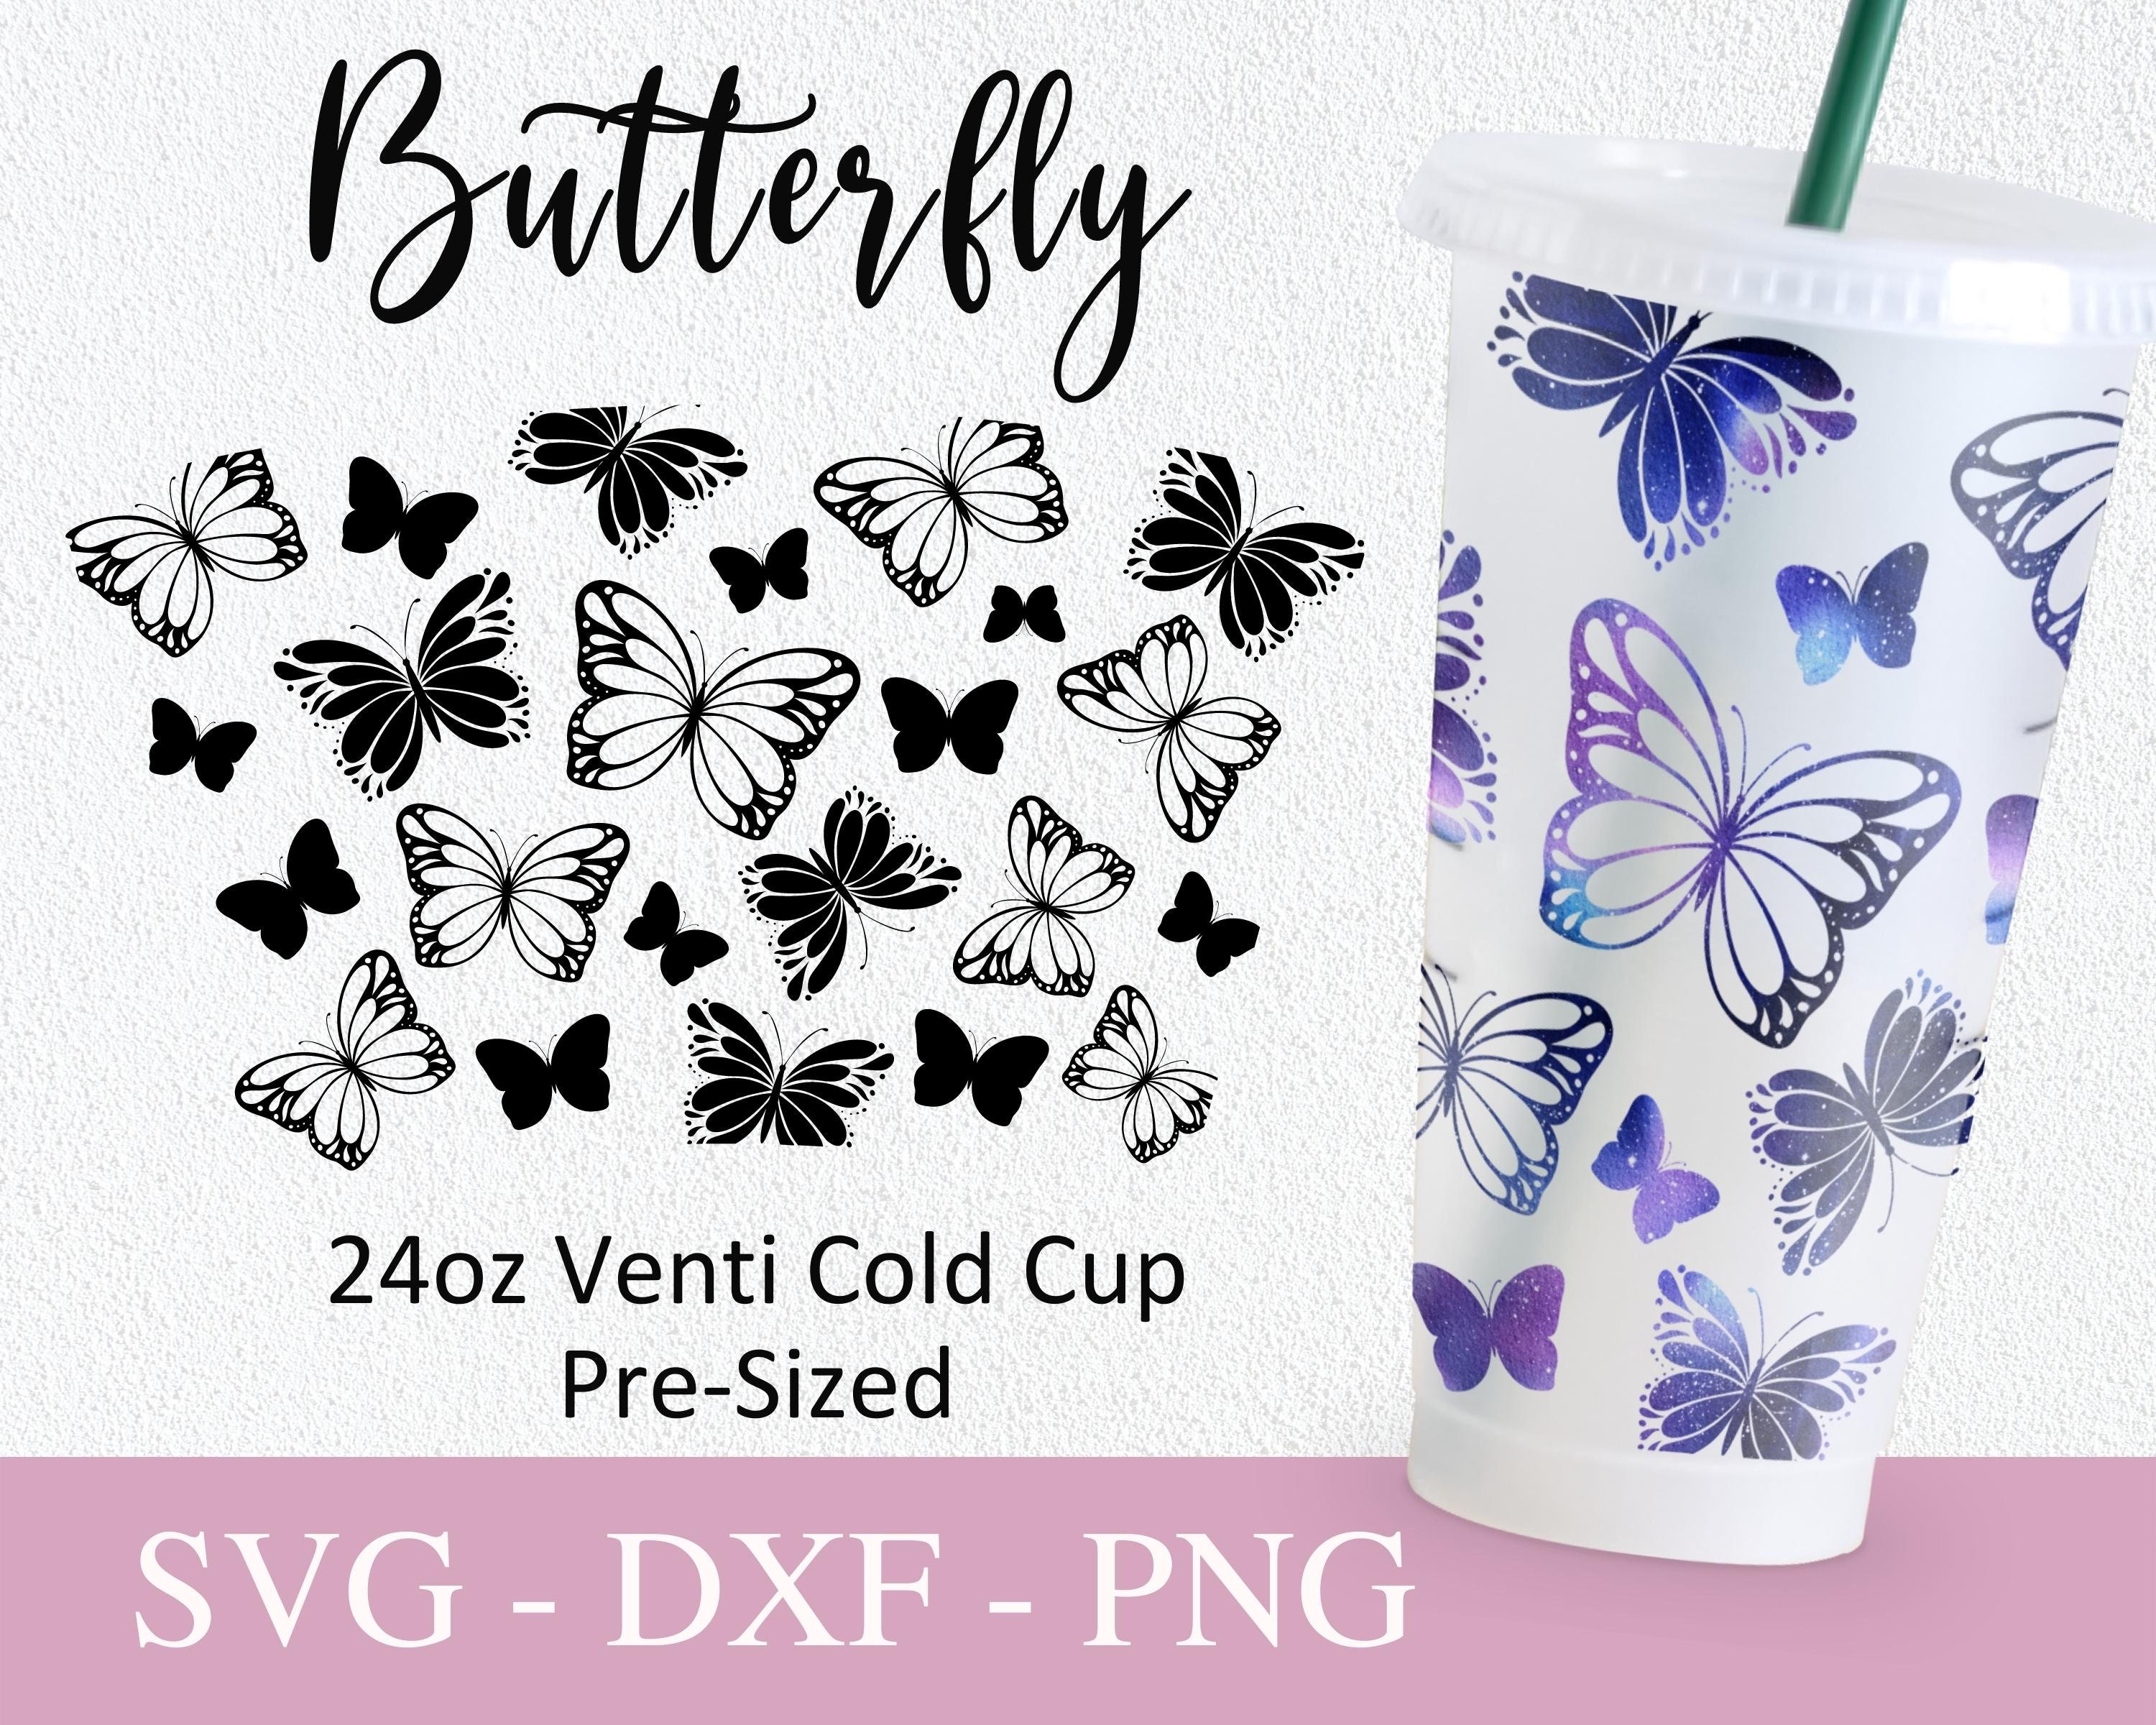 Starbucks Cup SVG Starbucks Cup Cutting File Coffee Cup Design Vector  Starbucks Hot Cup Starbucks Decoration SVG 